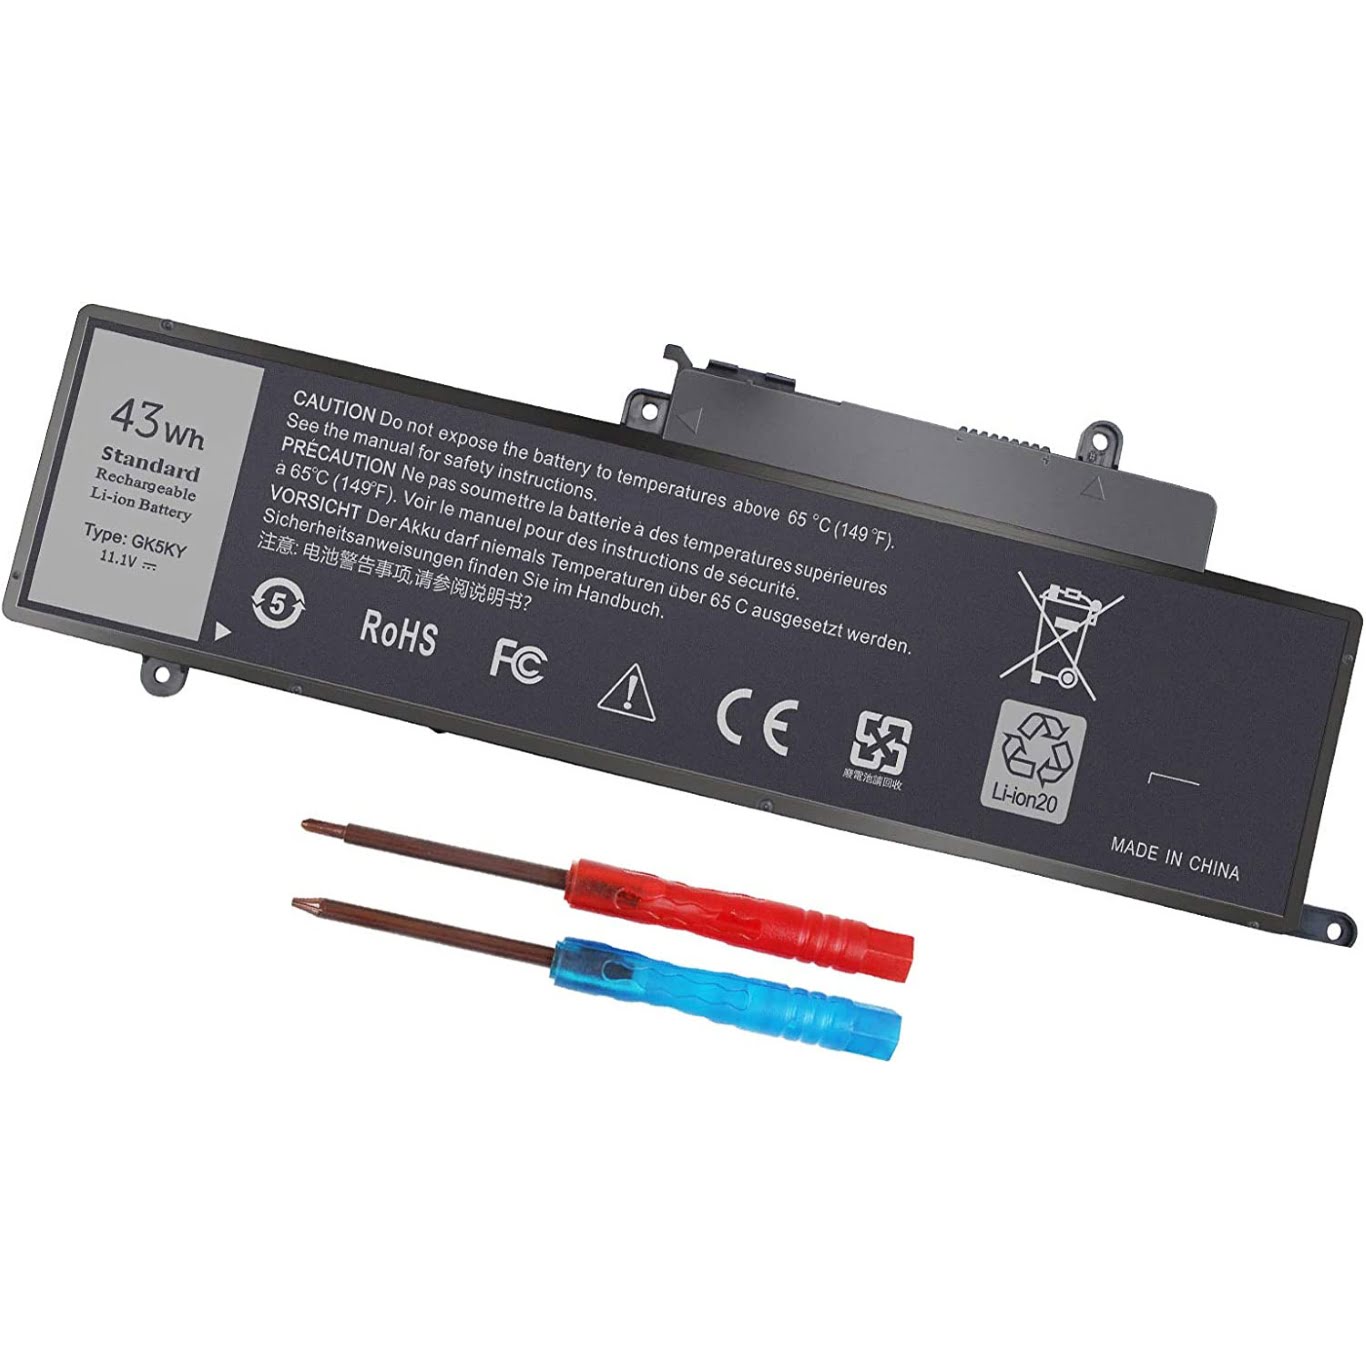 Dell 0gk5ky, 0wf28 Laptop Battery For Ins11wd-5108t, Ins11wd-5208t replacement